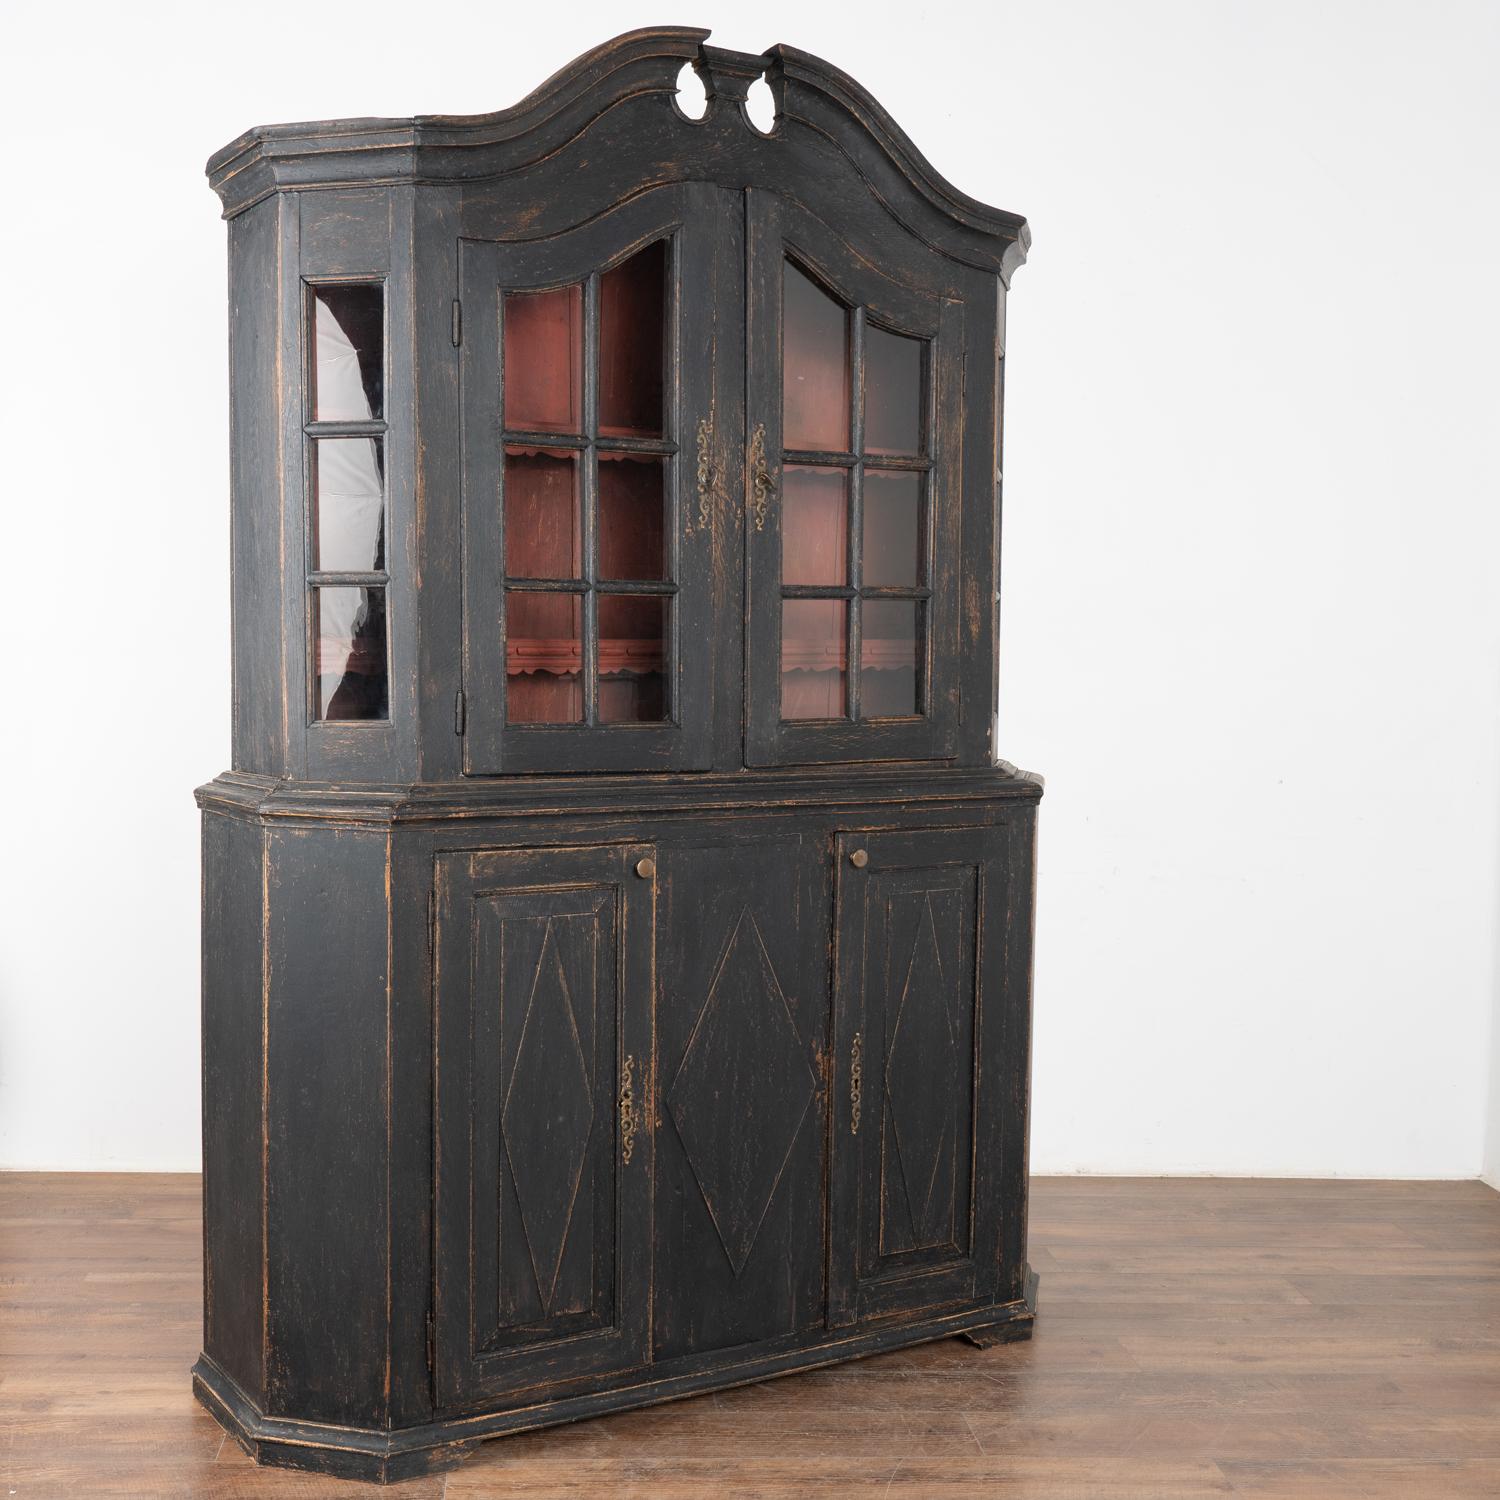 This Danish country pine cupboard may be used as a display cabinet or bookcase. The upper pane glass doors allow for lovely display of any collection held within.
The newer professionally applied black painted finish is lightly distressed to fit the